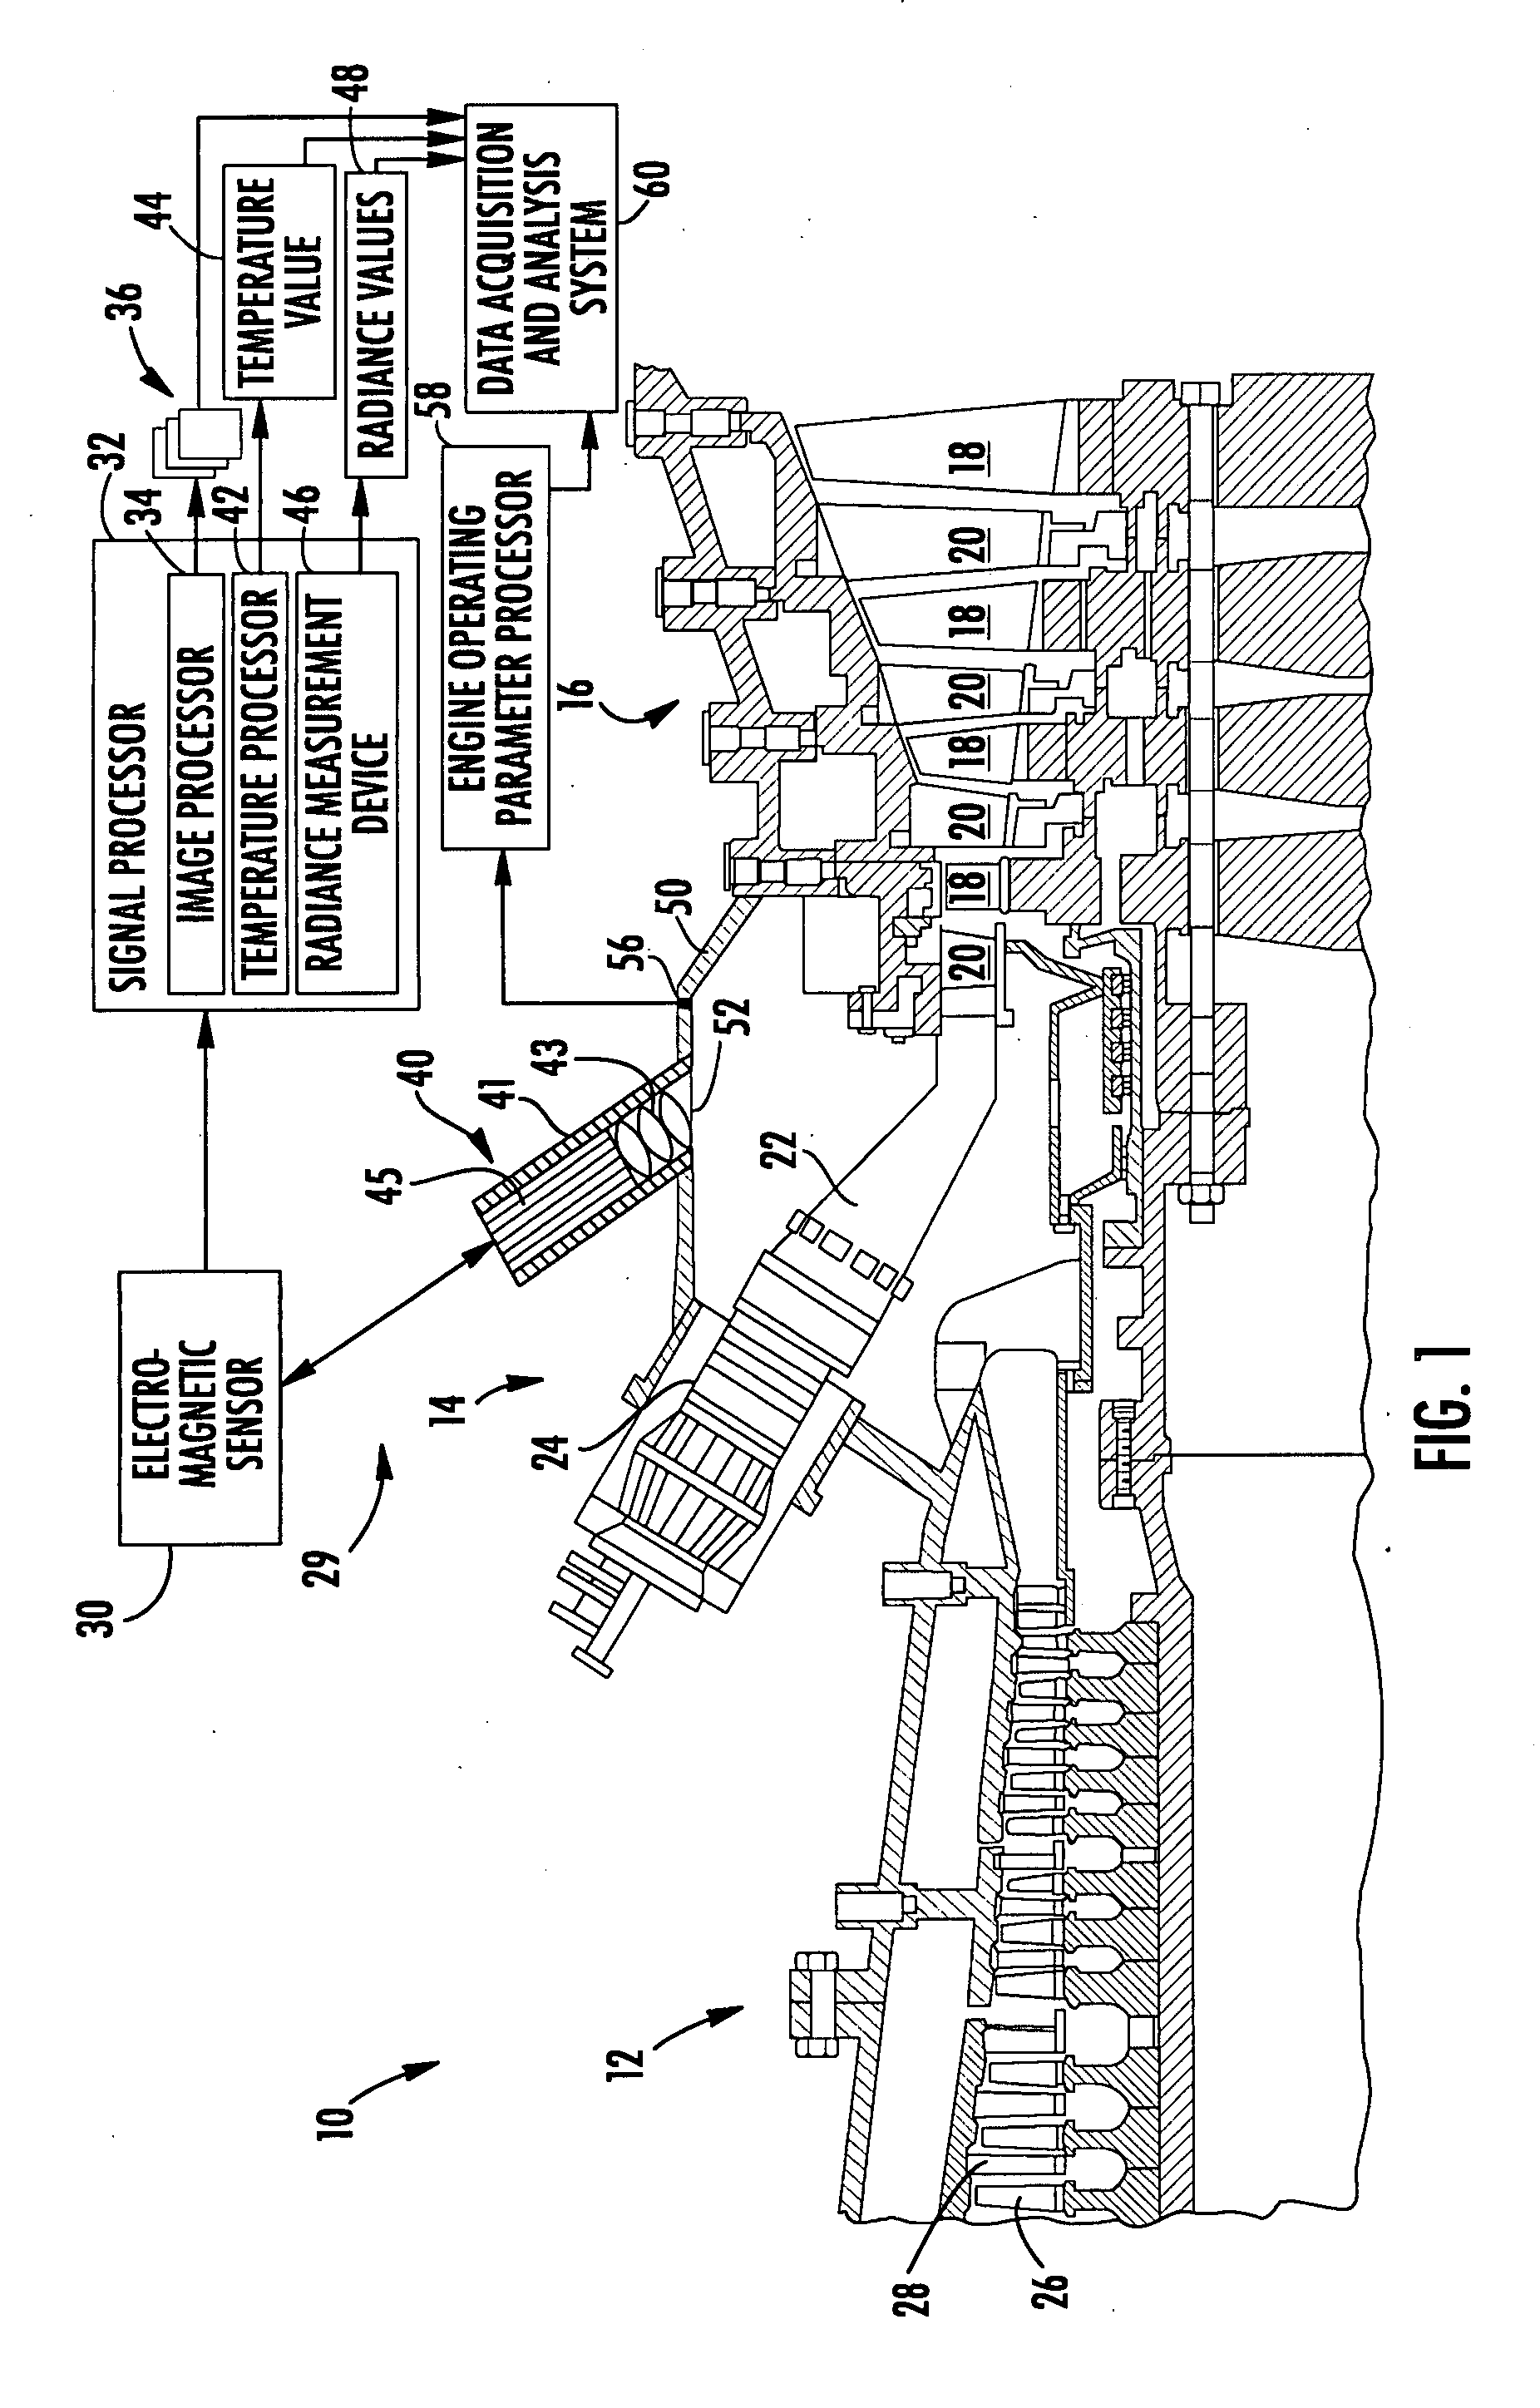 System and method of evaluating uncoated turbine engine components